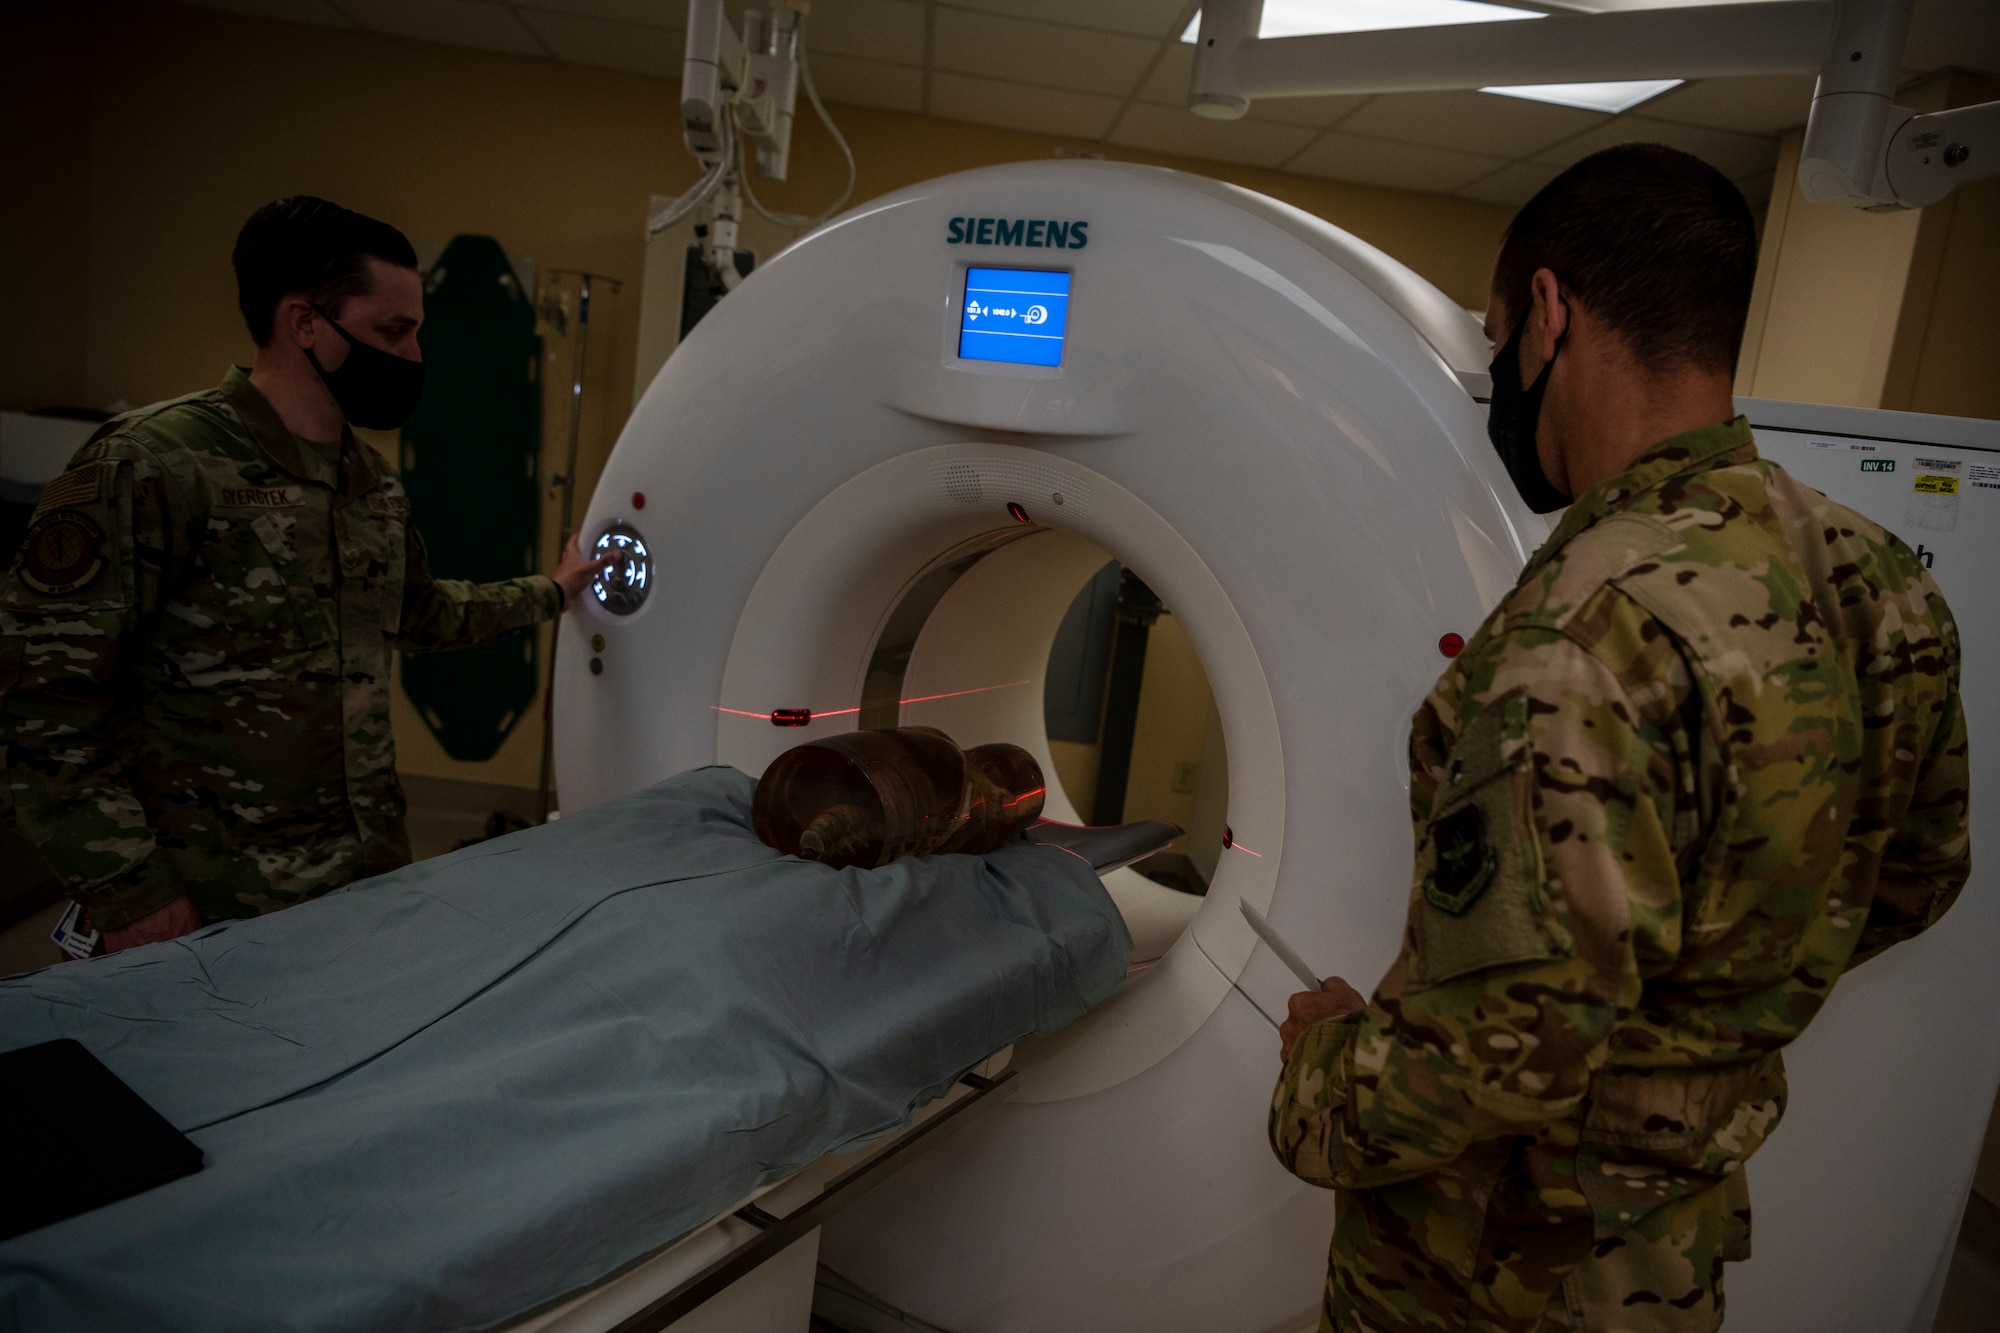 An Airman shows a higher ranking Airman how a large machine scans the body.